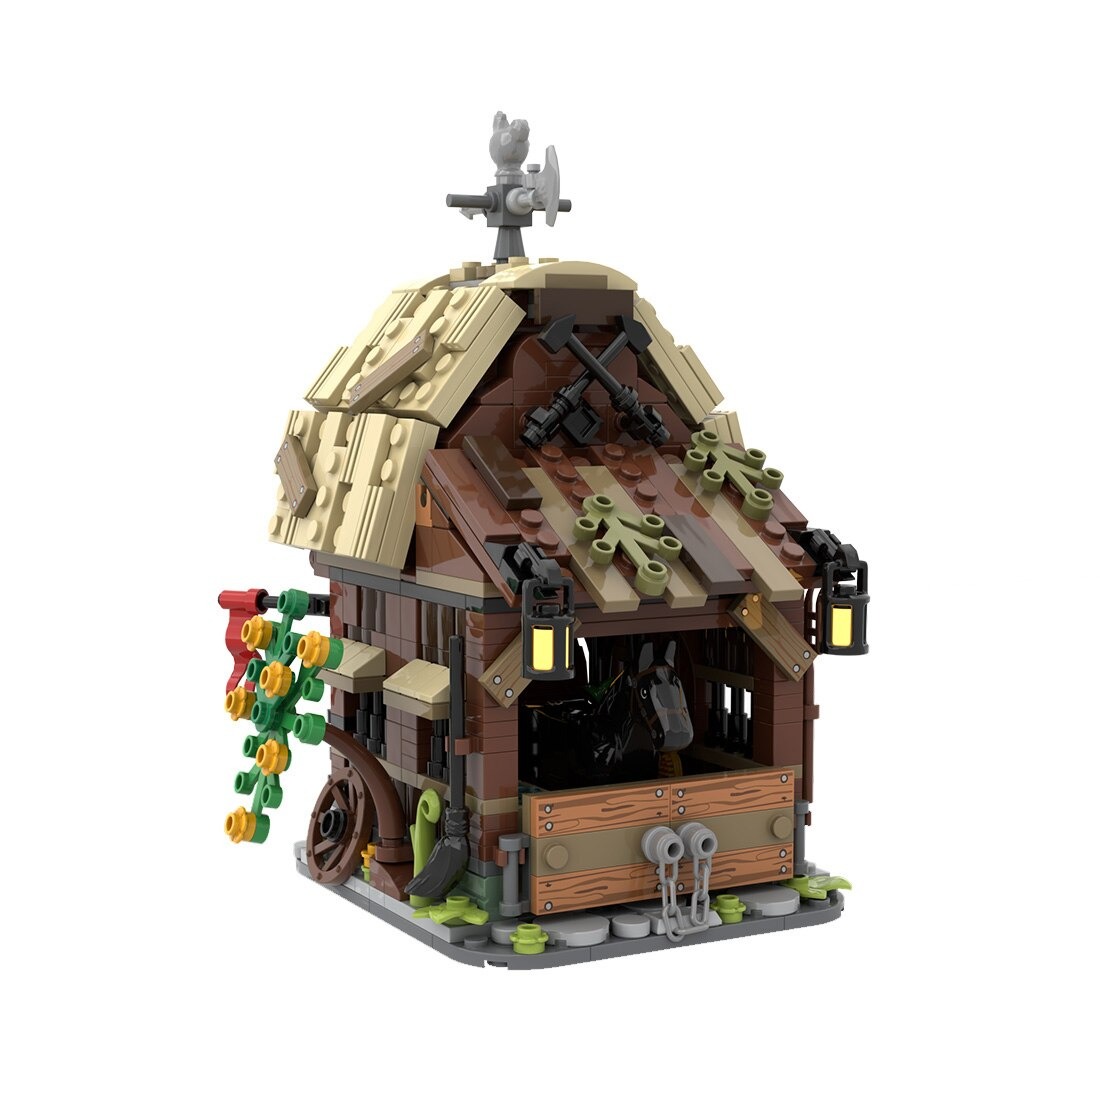 MOCBRICKLAND MOC-114761 Medieval Barn And Stable